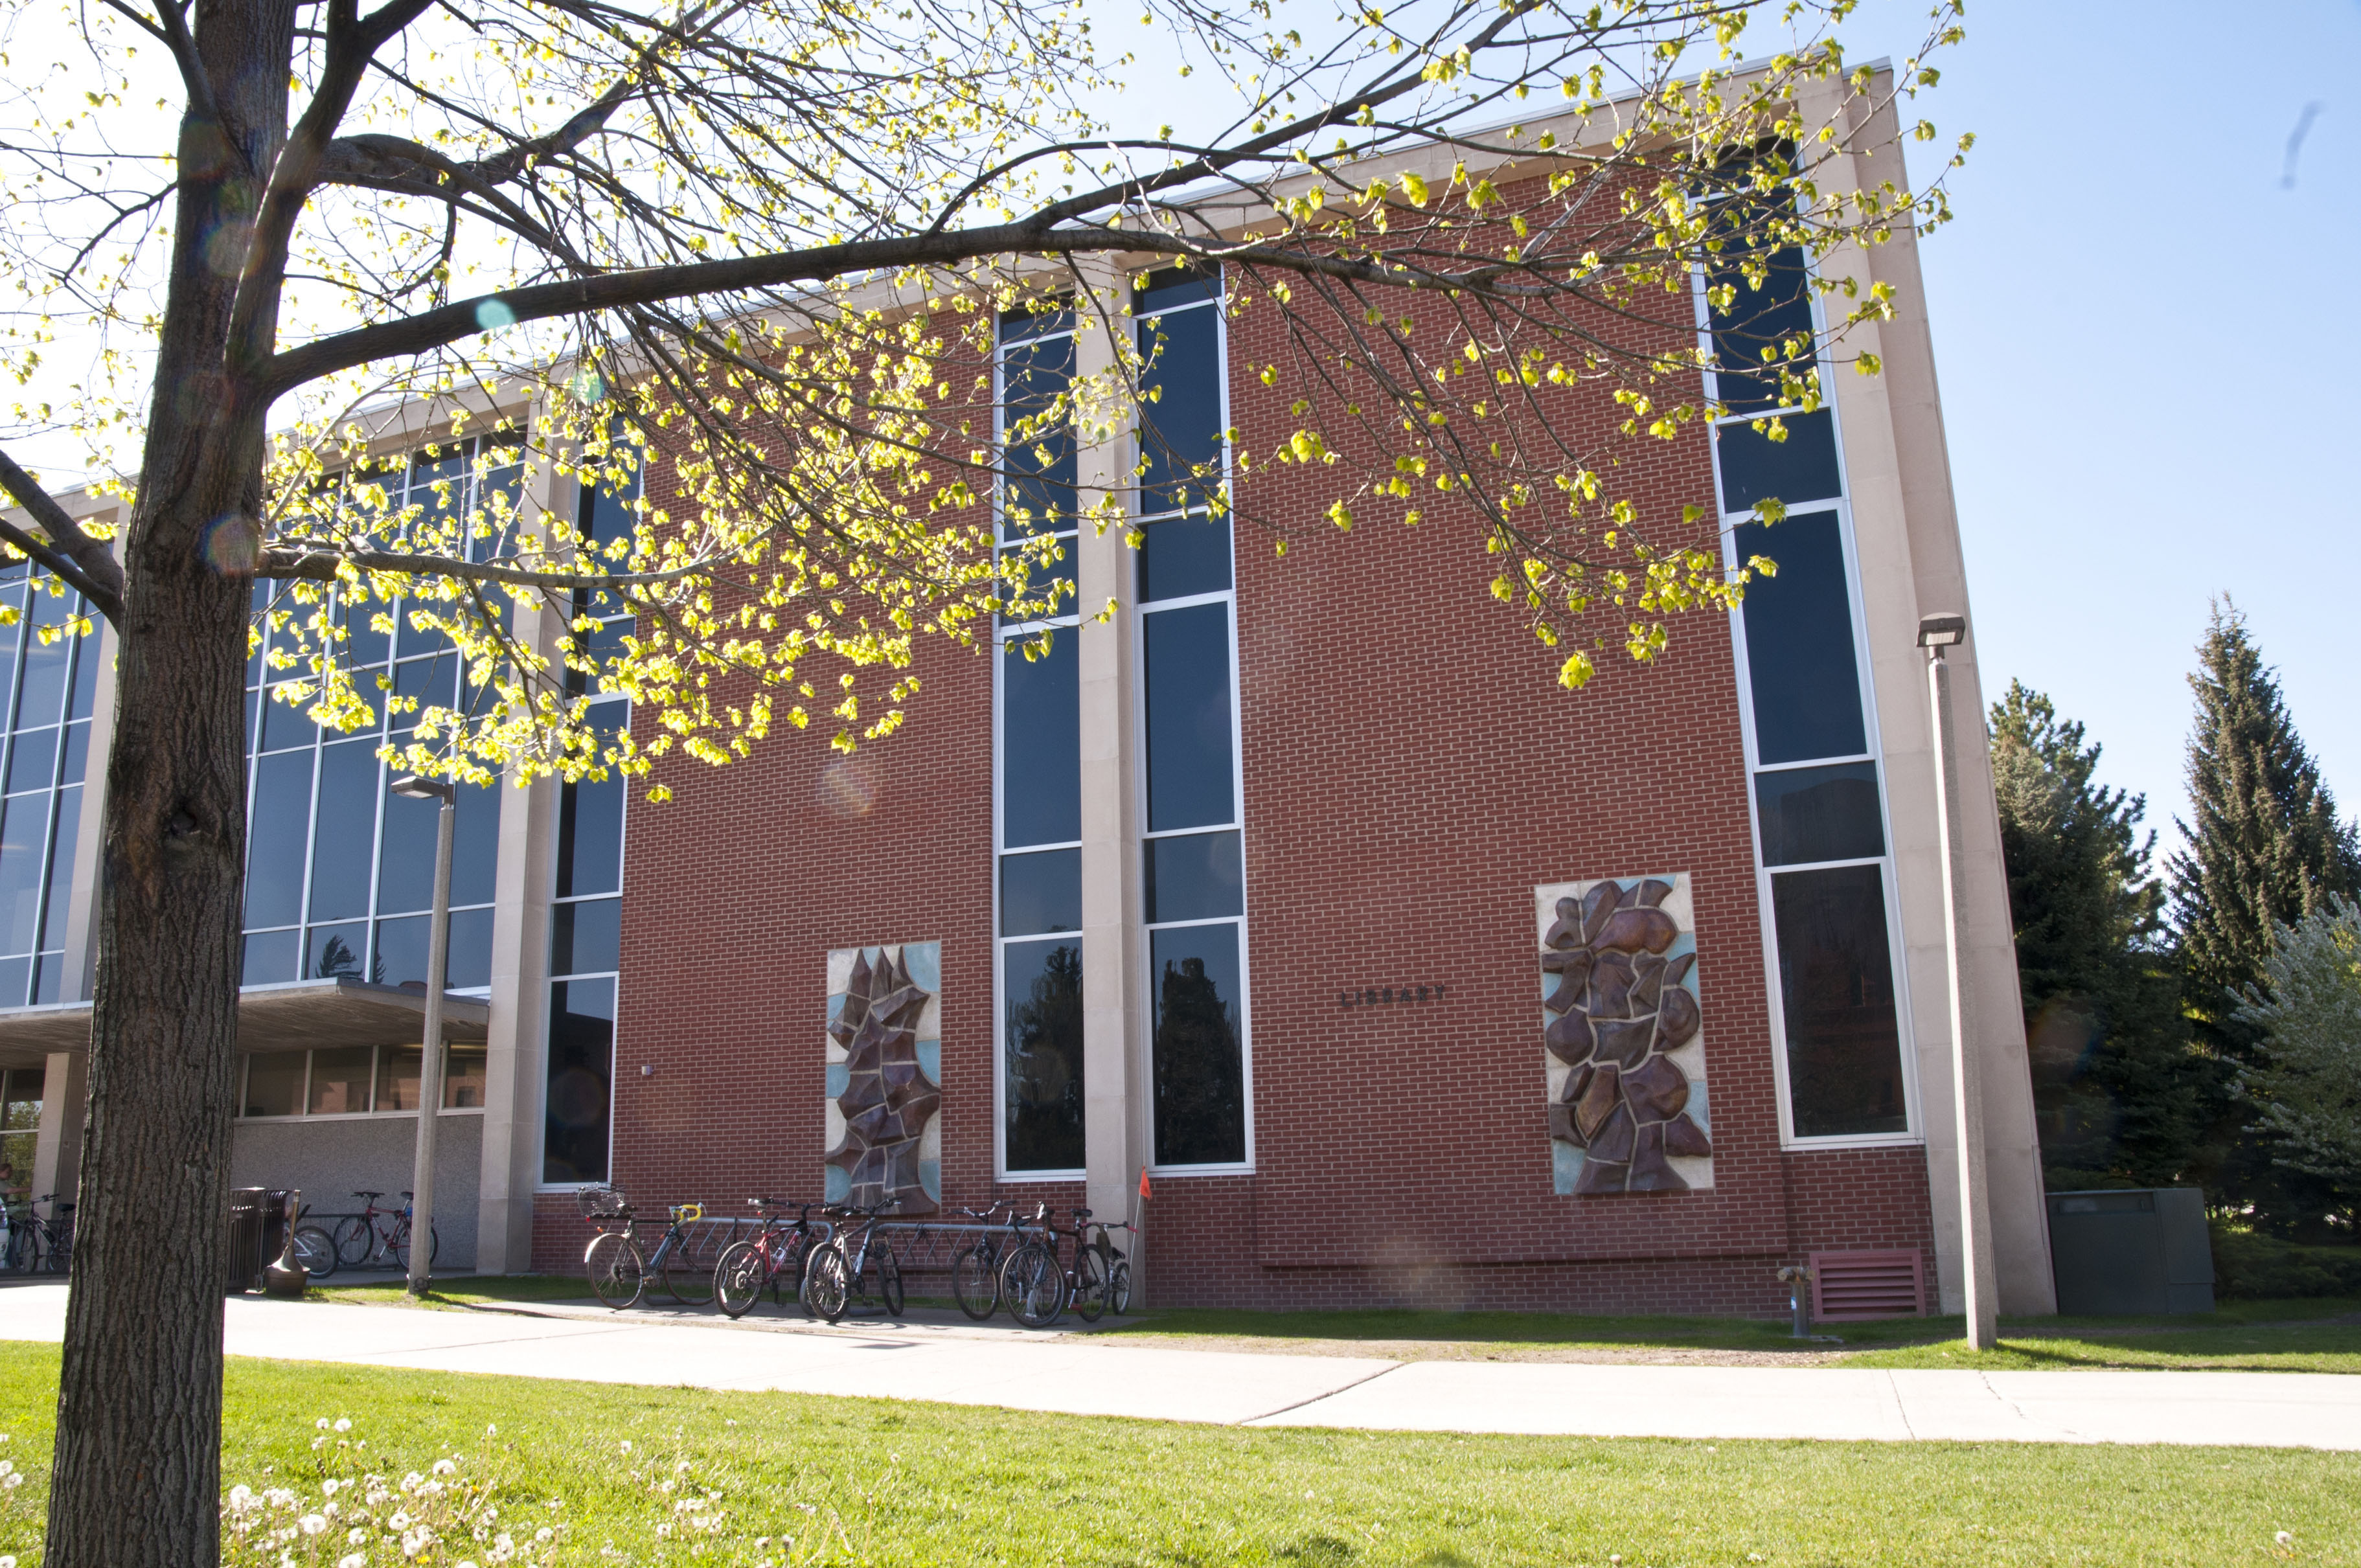 An image of the exterior of the Renne Library building.